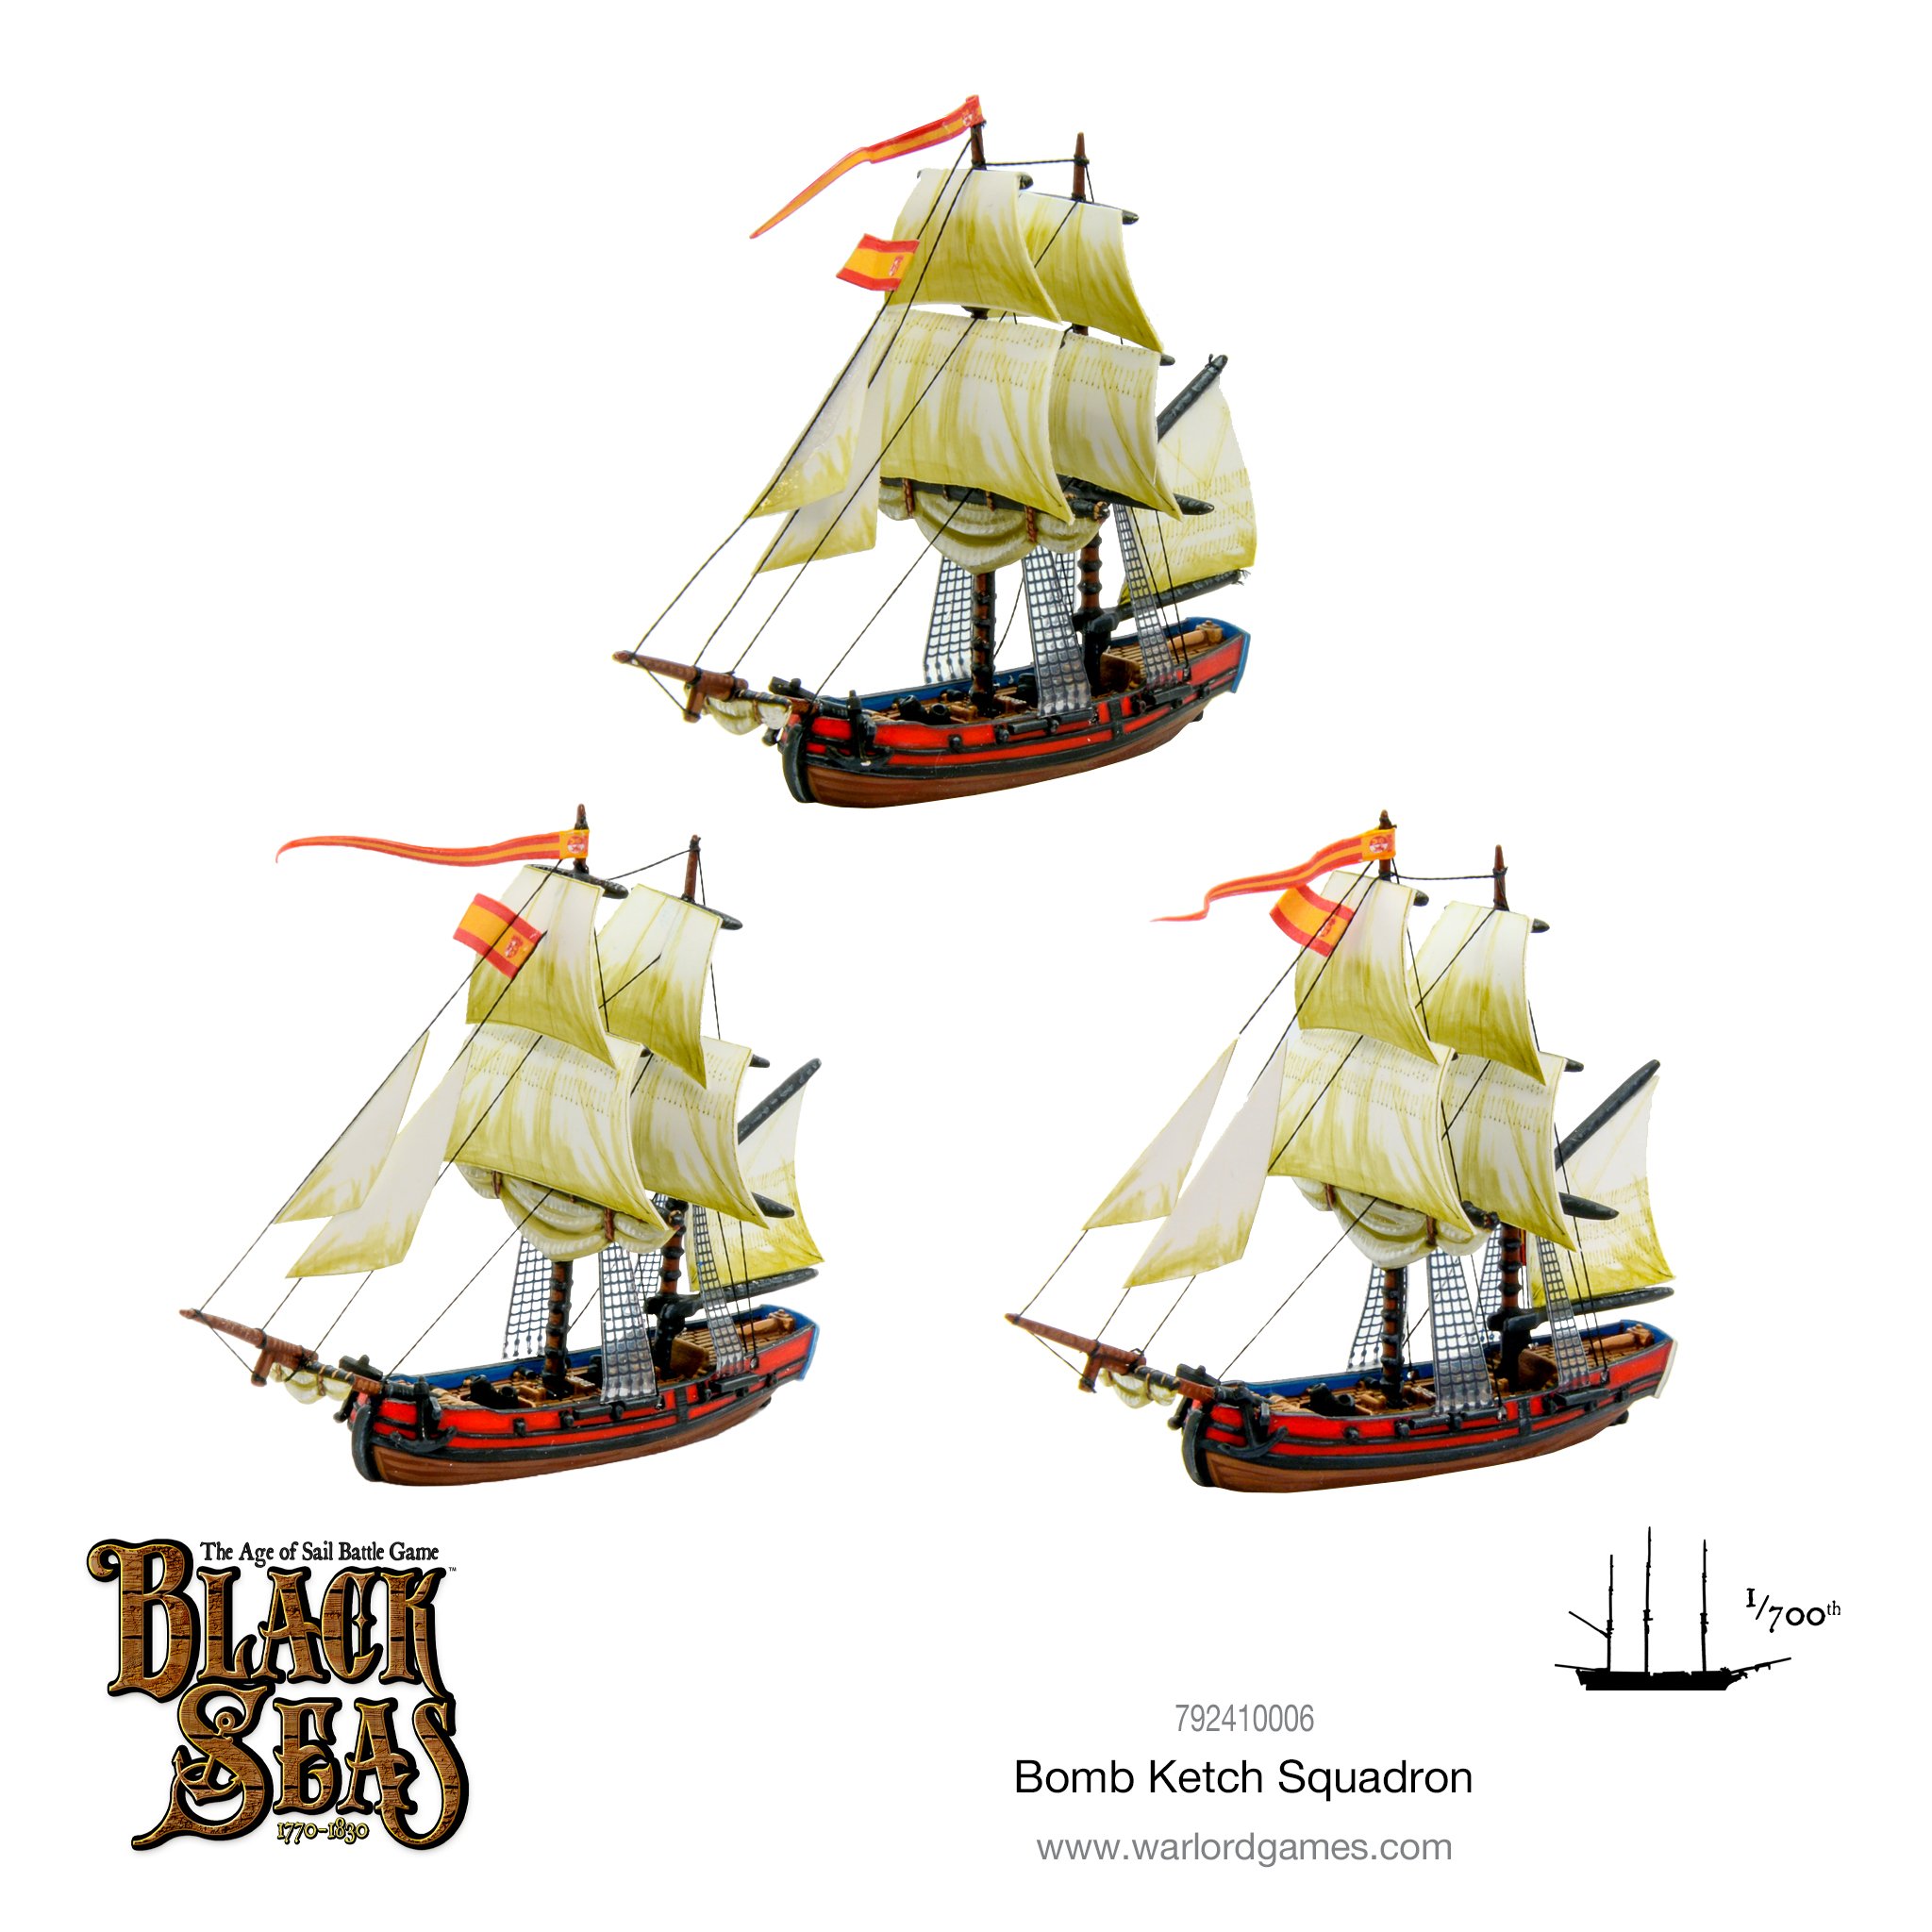 Warlord Embrace Speed And Mortars With New Black Seas Ships Ontabletop